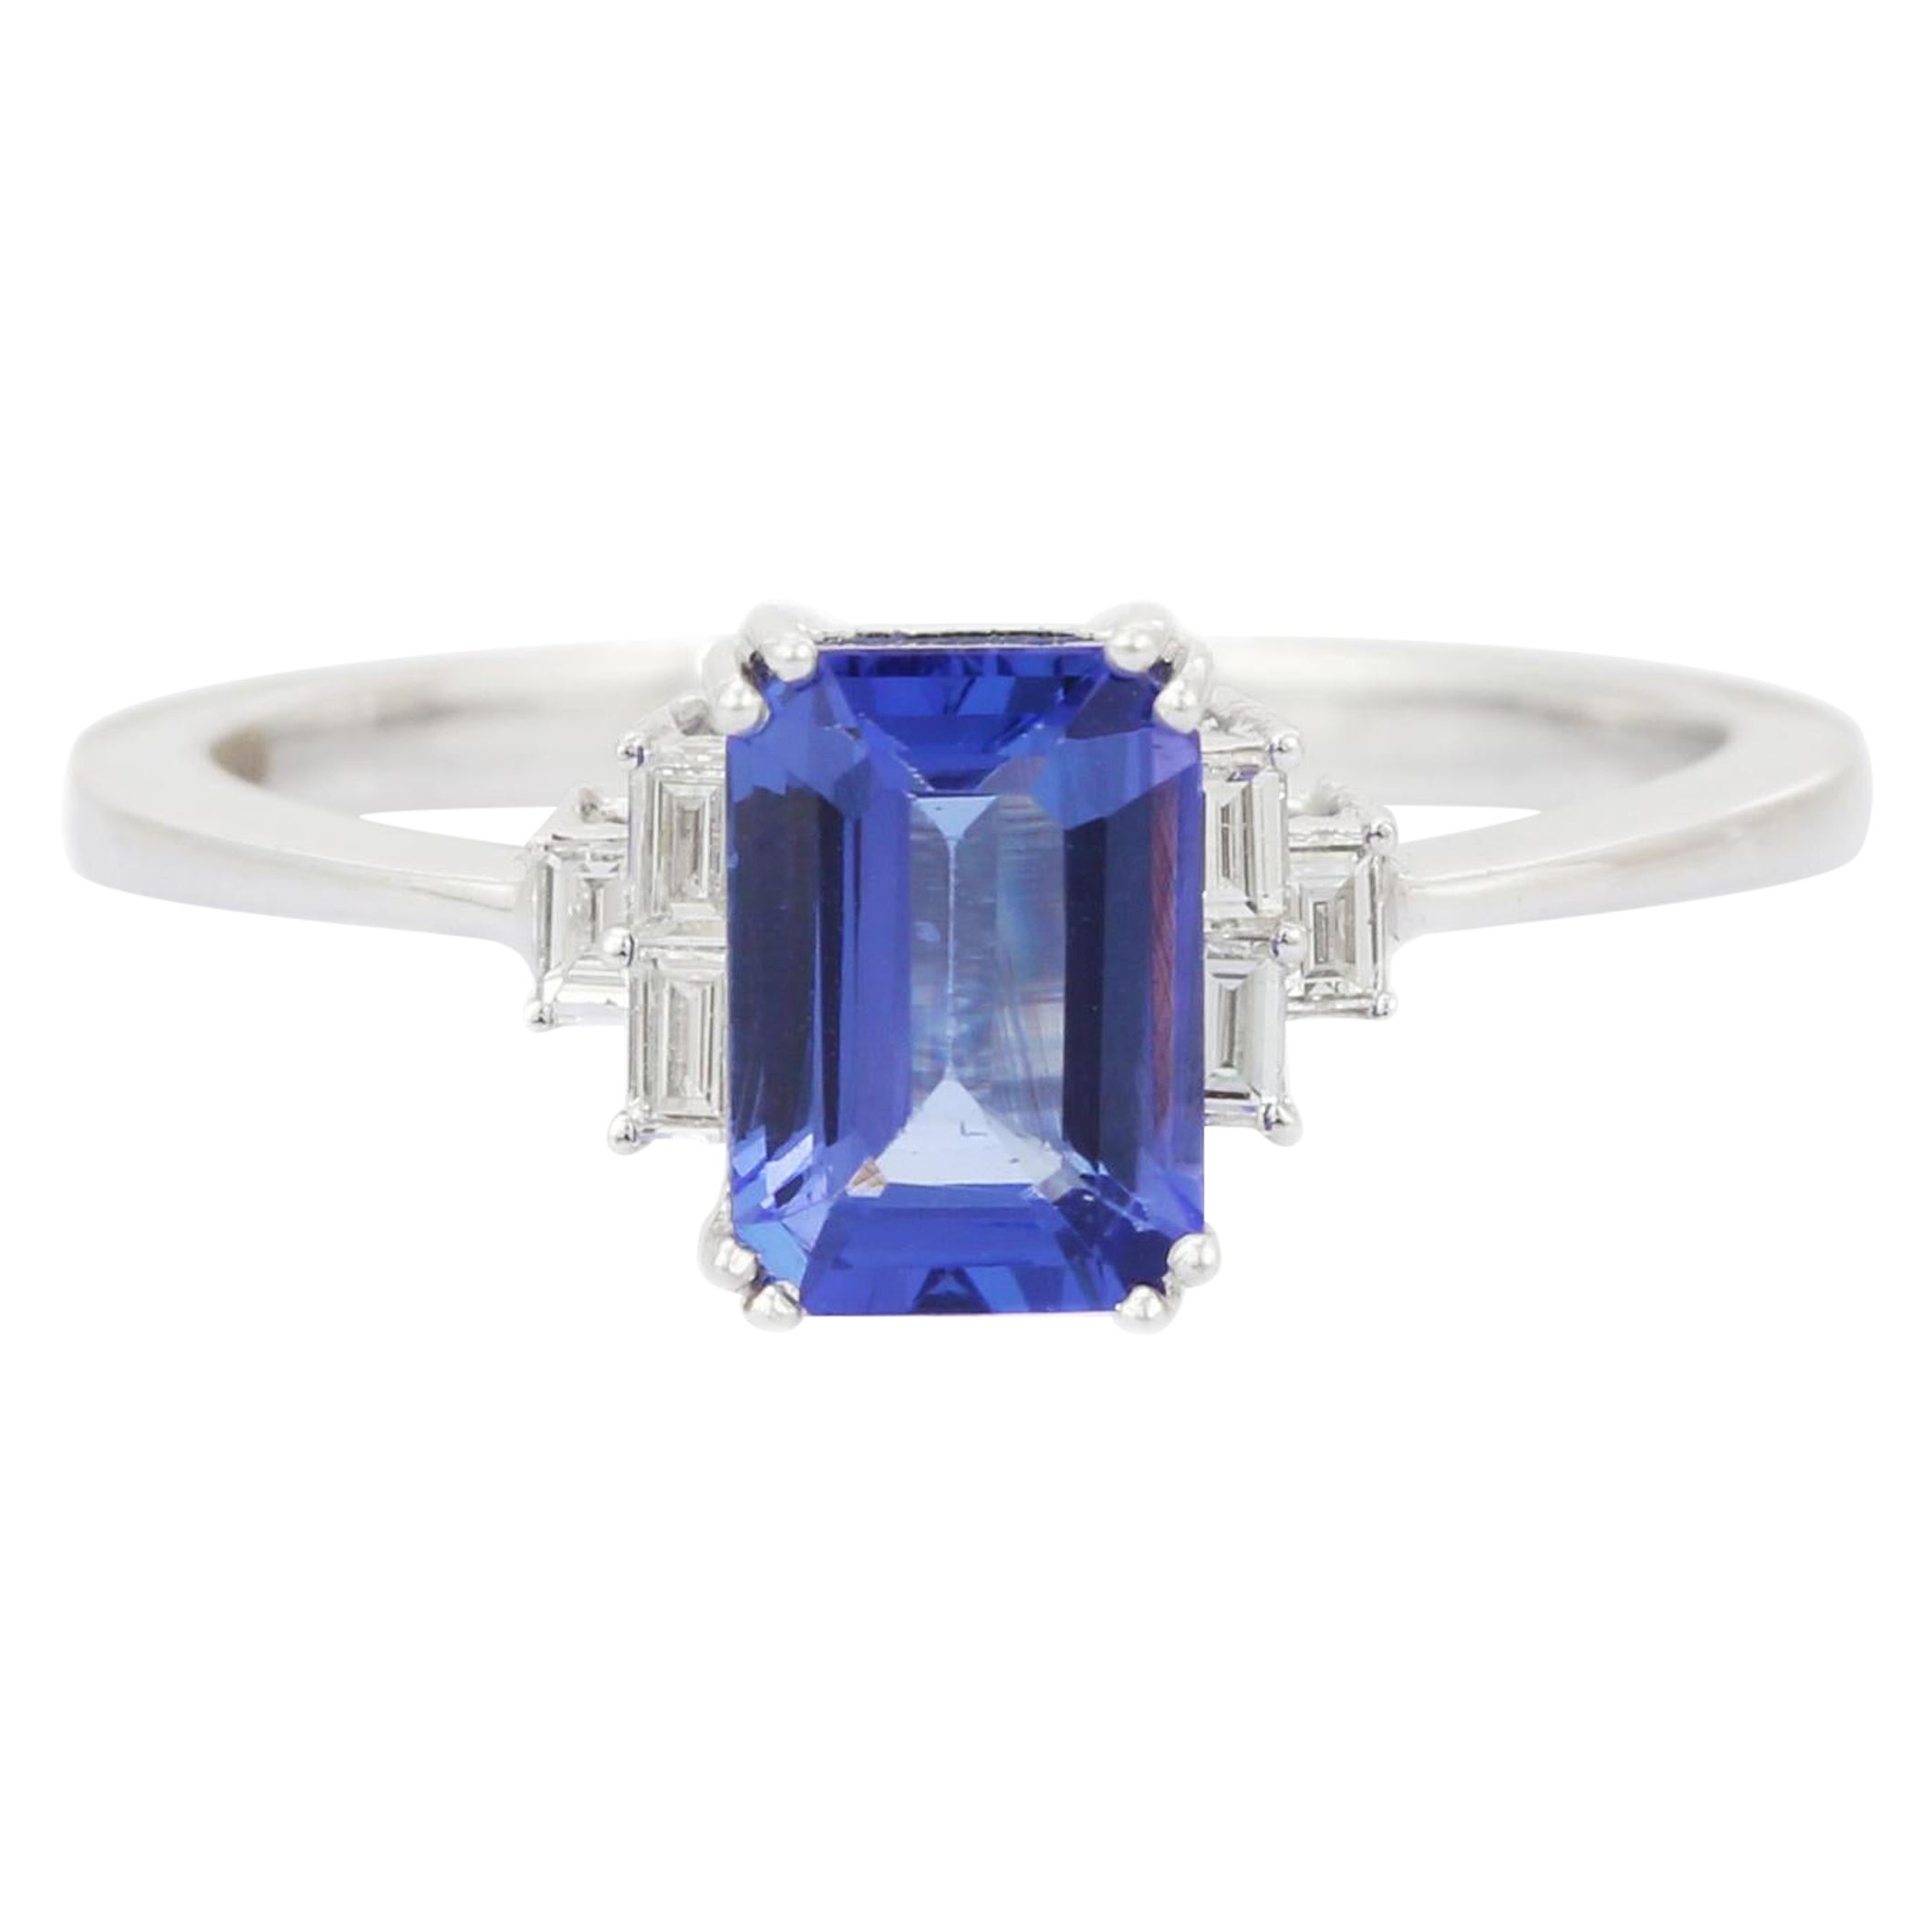 For Sale:  Octagon Shape Tanzanite Ring with Diamonds in 18K White Gold